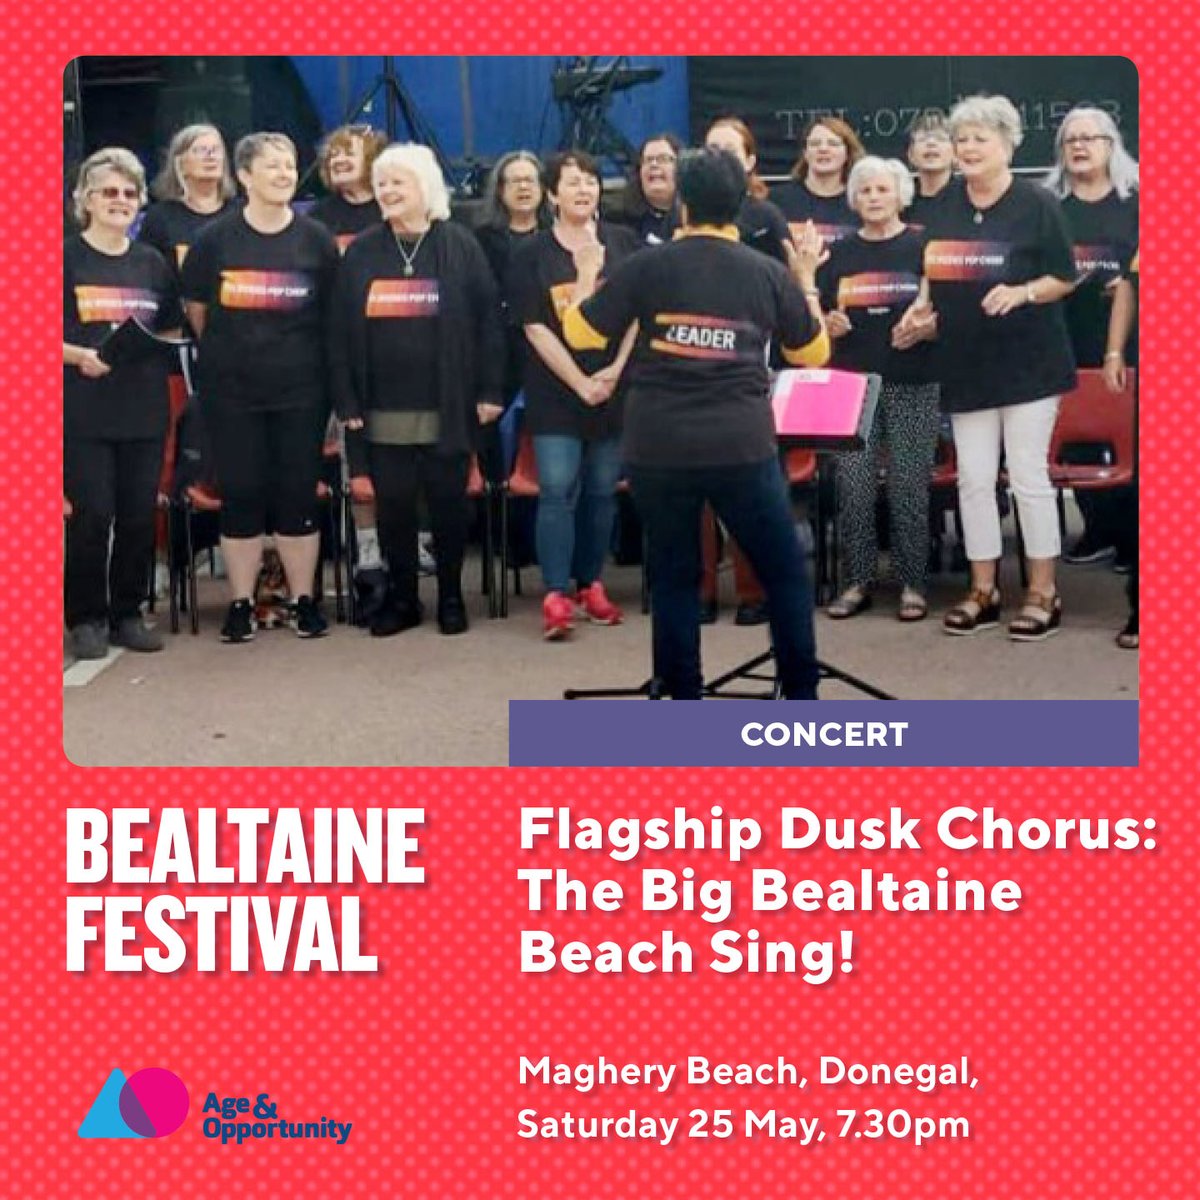 The Bealtaine Flagship Dusk Chorus🌅Join Rosses Pop Choir and public for the Big Bealtaine Beach Sing, which will close out a month of festivities with uplifting anthems from Queen, Toto, Adele, and more! 📍 Maghery Beach, Donegal 🗓️ 25 May 7:30pm @Sing_Ireland @age_opp